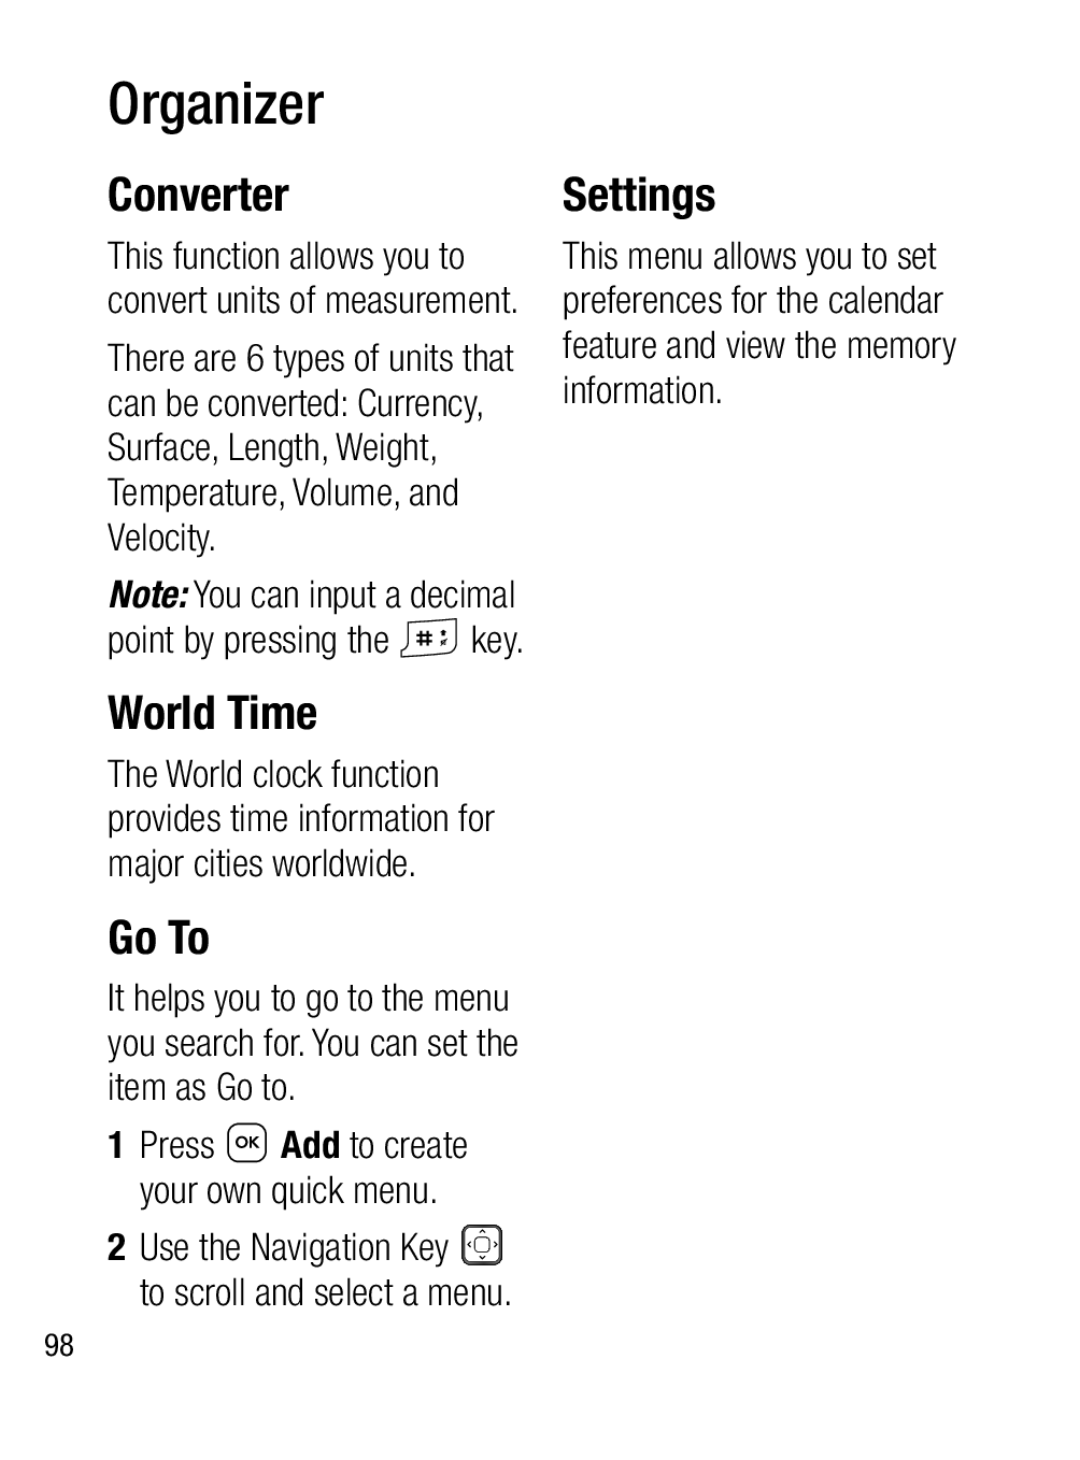 LG Electronics A133CH manual Converter, World Time, Go To, Organizer, Settings 